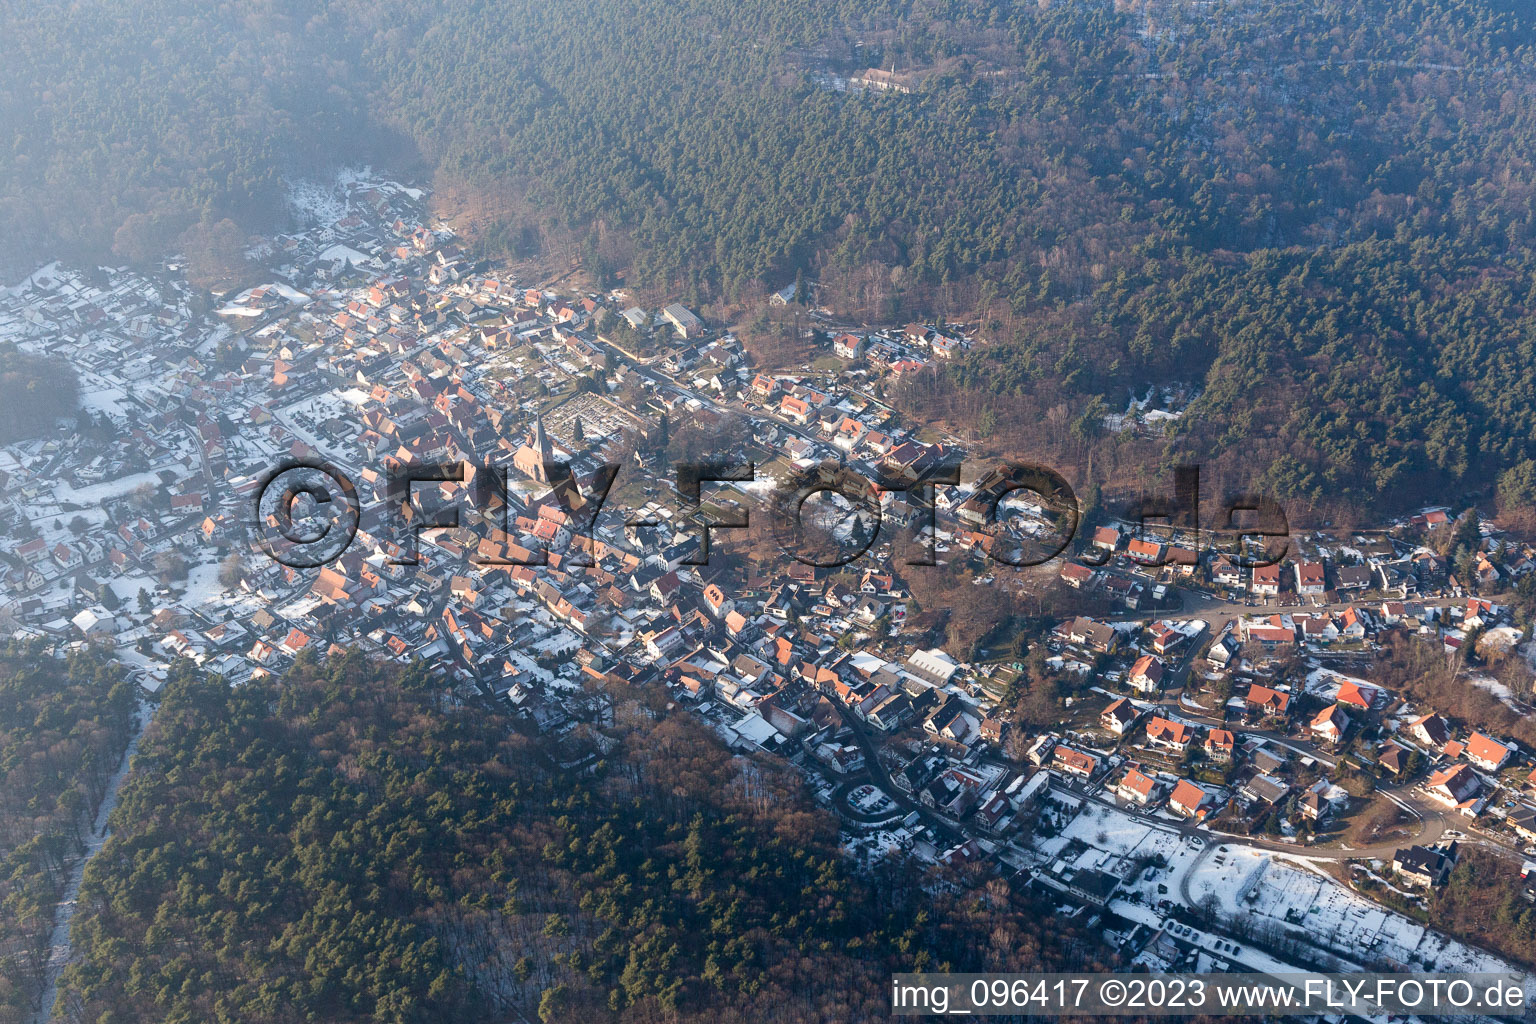 Dörrenbach in the state Rhineland-Palatinate, Germany from a drone